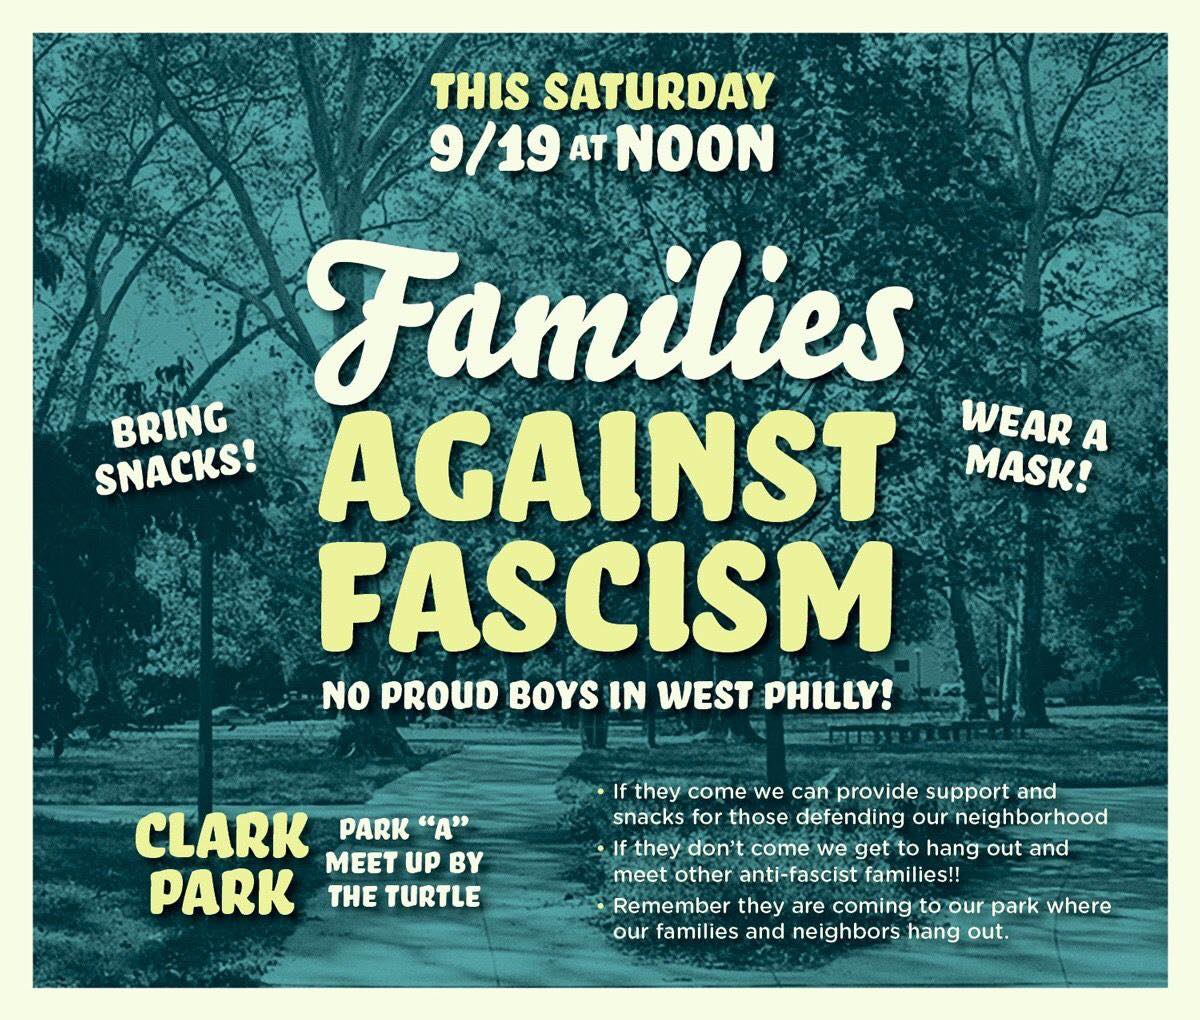 So this Saturday 9/19, members of the Philadelphia Proud Boys claim to be gathering at Clark Park in West Philly. A pair of community actions have been planned at the park in response. Tensions are high, so let's dispel fear with information: Who are the Proud Boys?